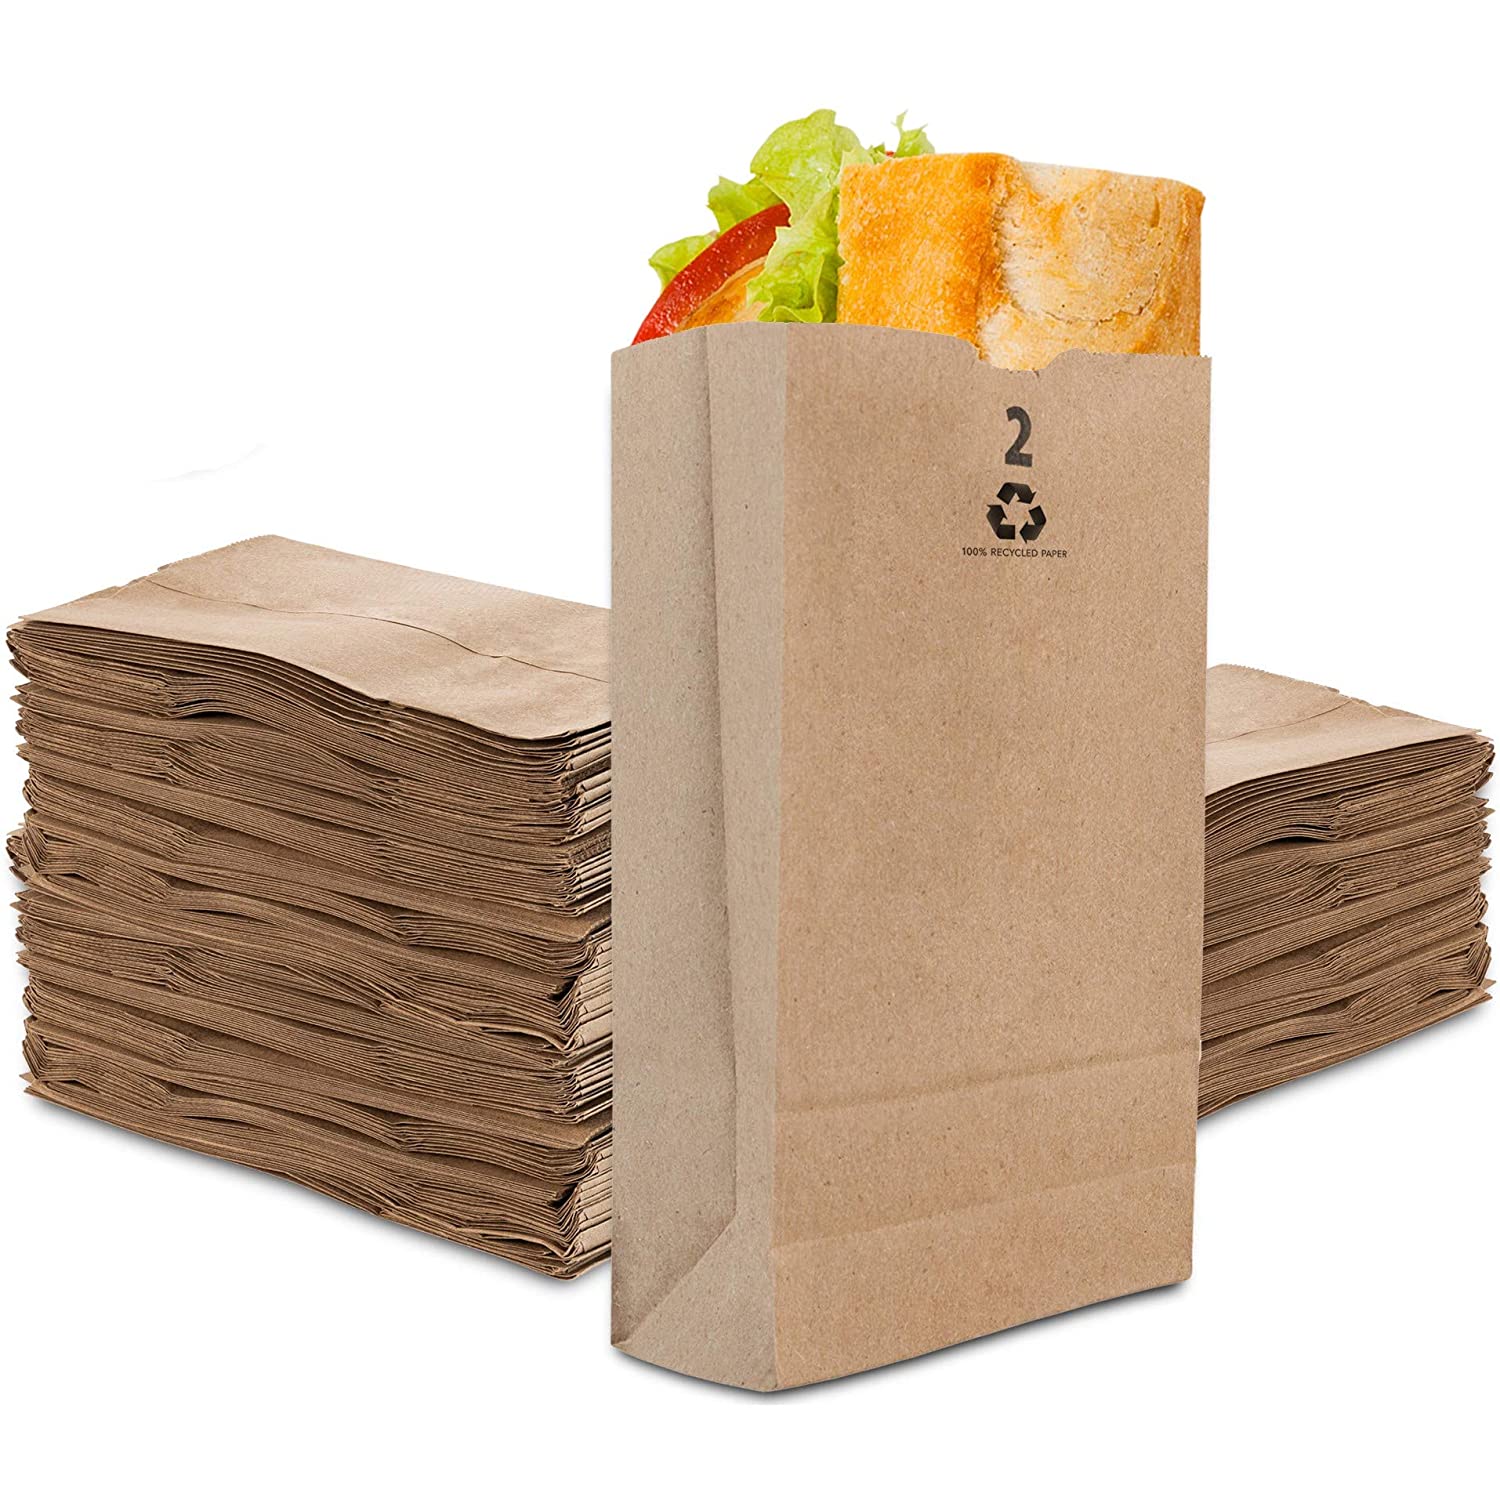 Paper bags Grocery Supplies at Lowes.com